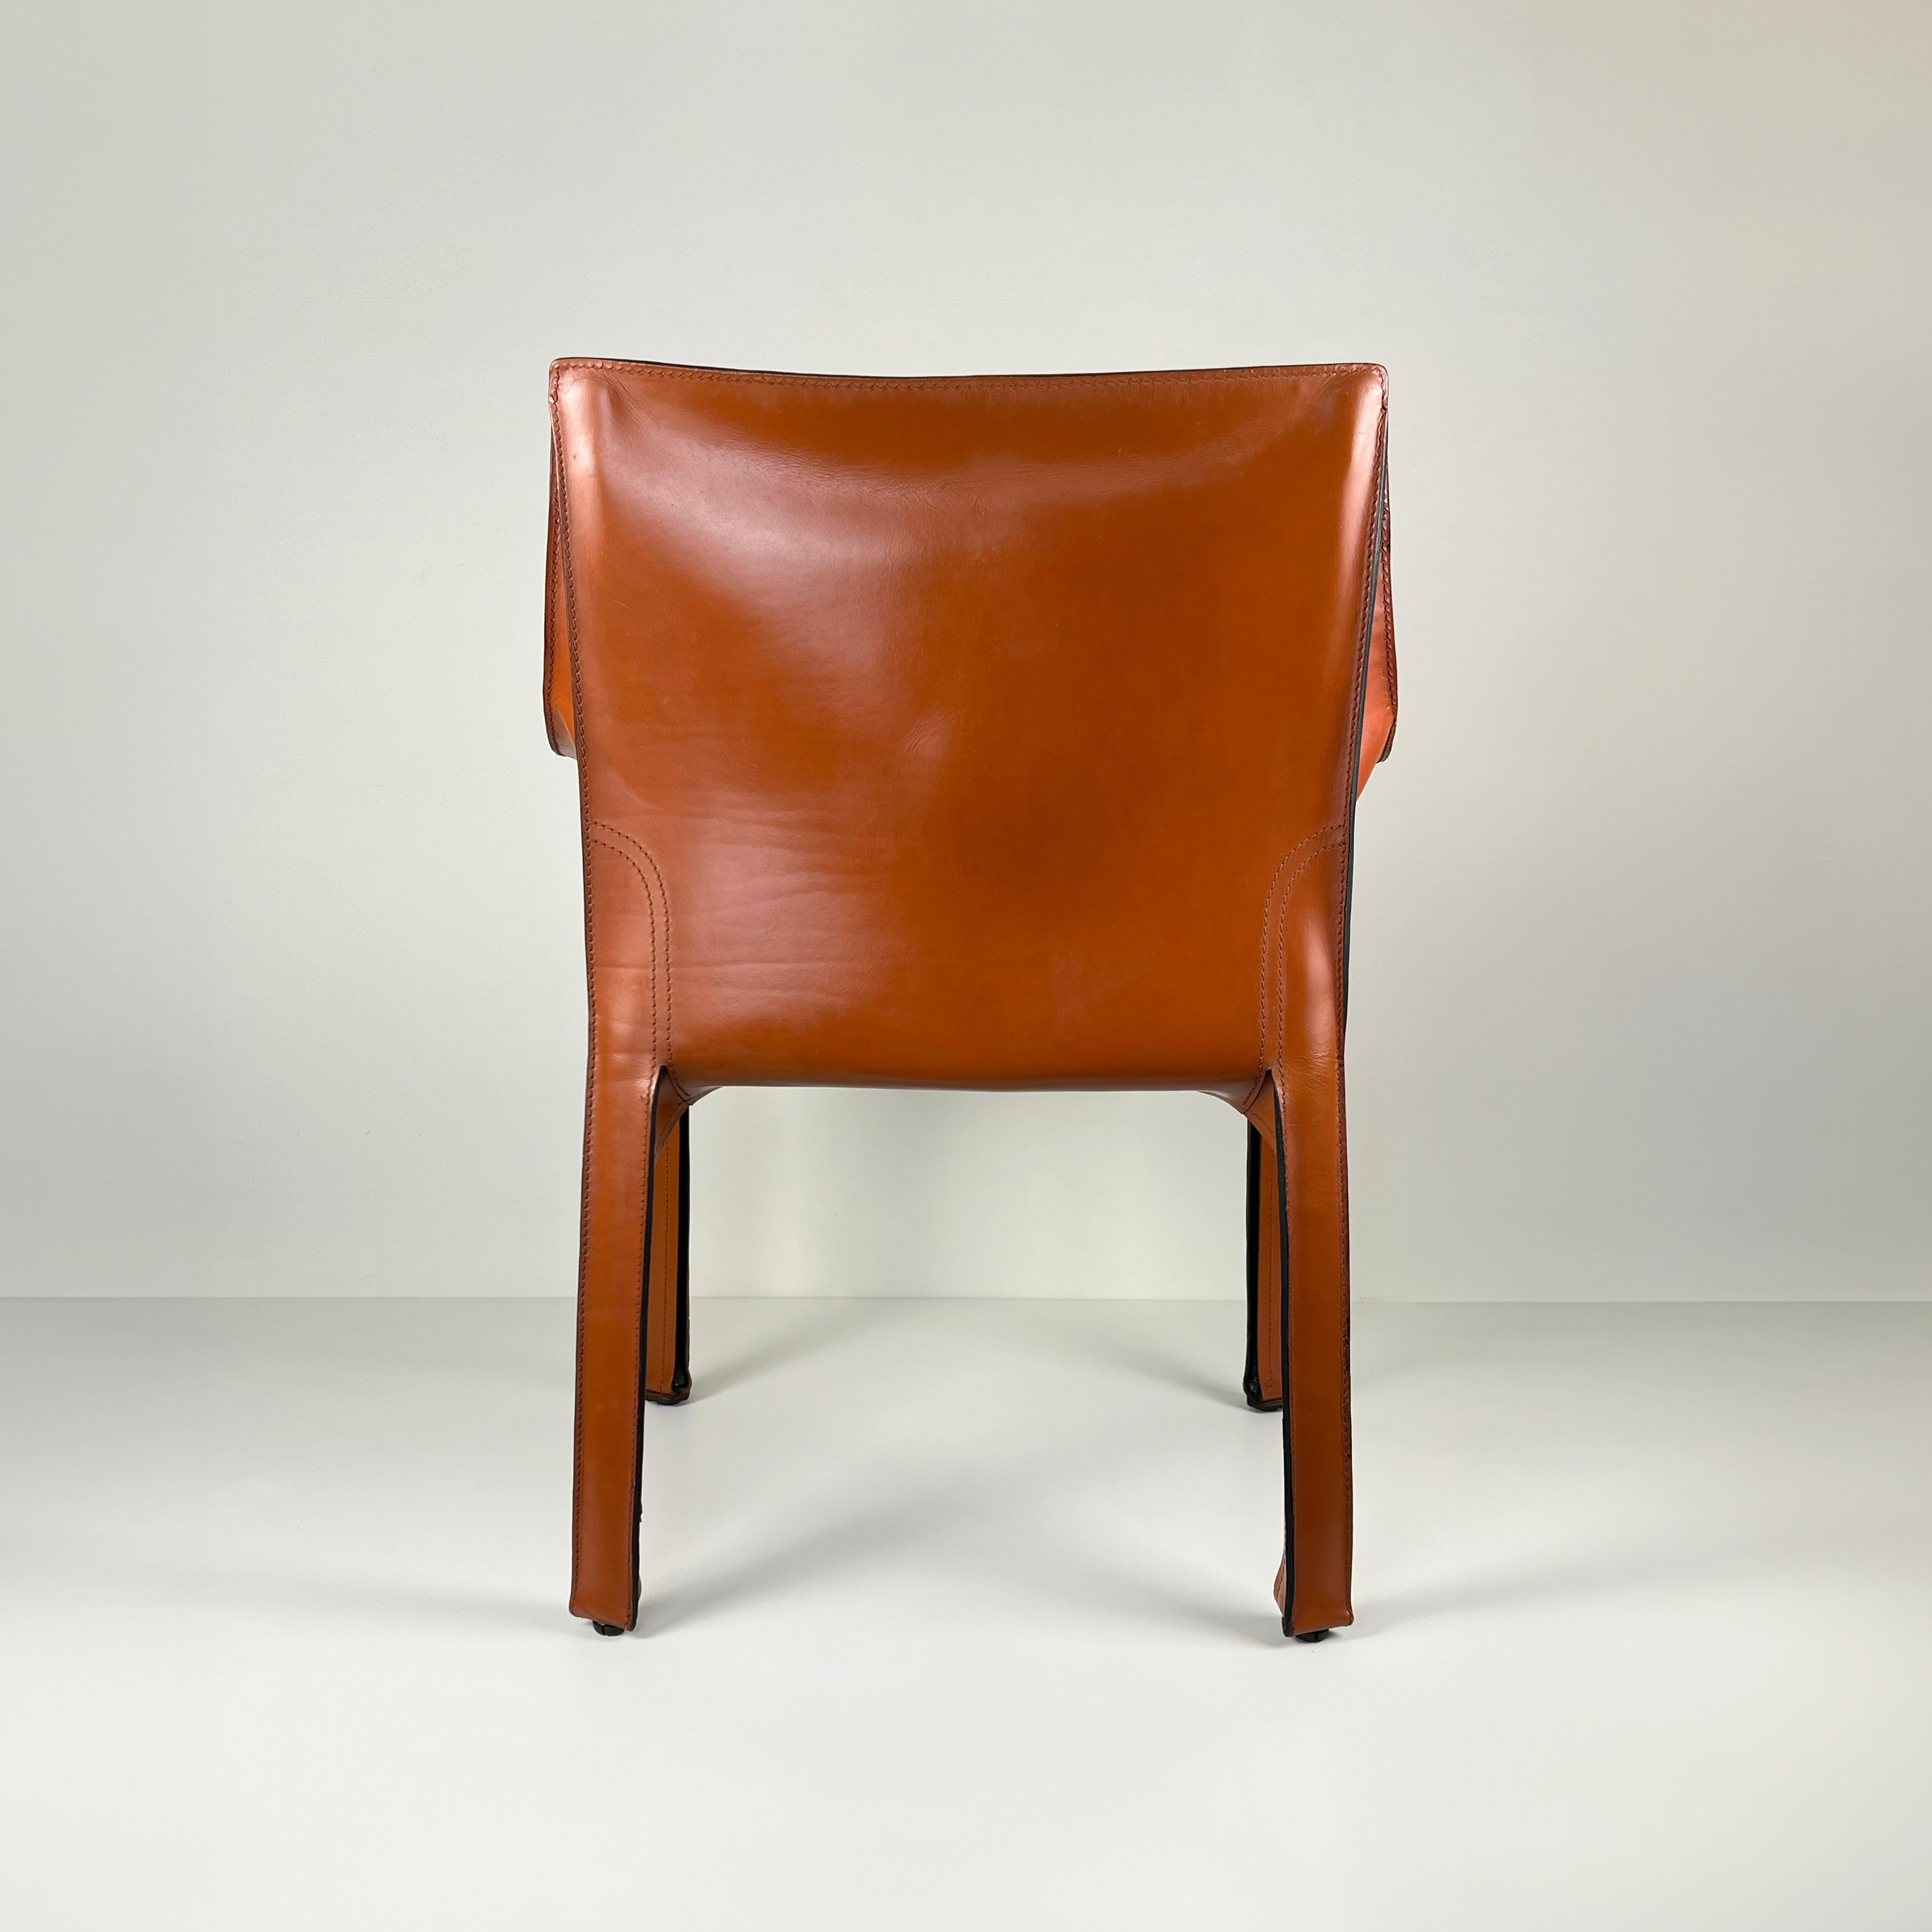 CAB 413 cognac leather armchair by Mario Bellini for Cassina, Italy 1970s For Sale 1